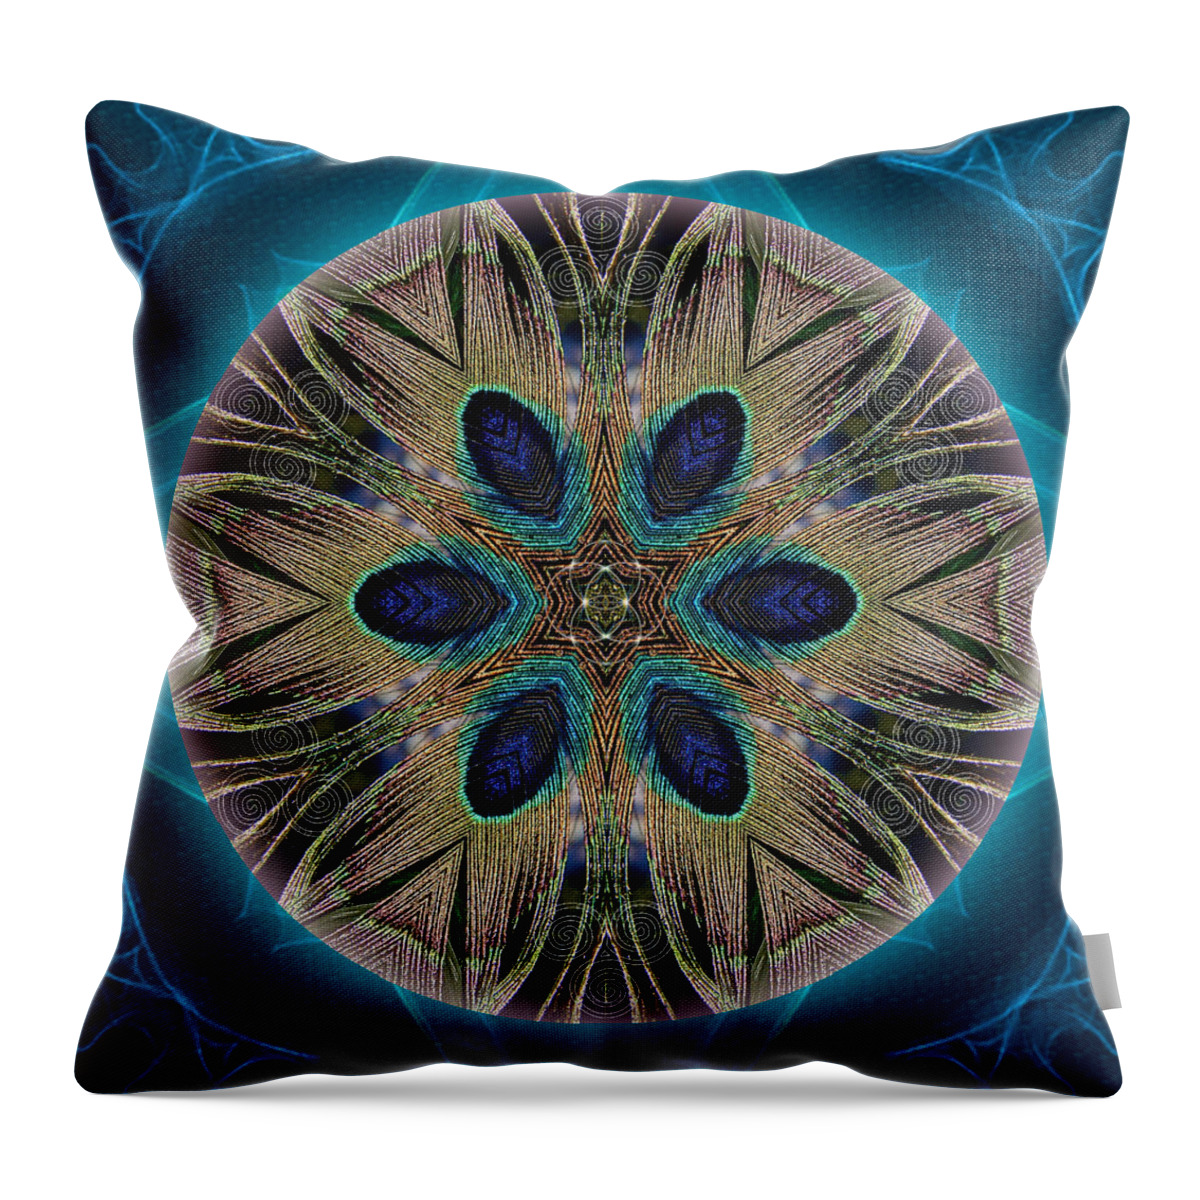 Mandala Throw Pillow featuring the mixed media Peacock Power by Alicia Kent